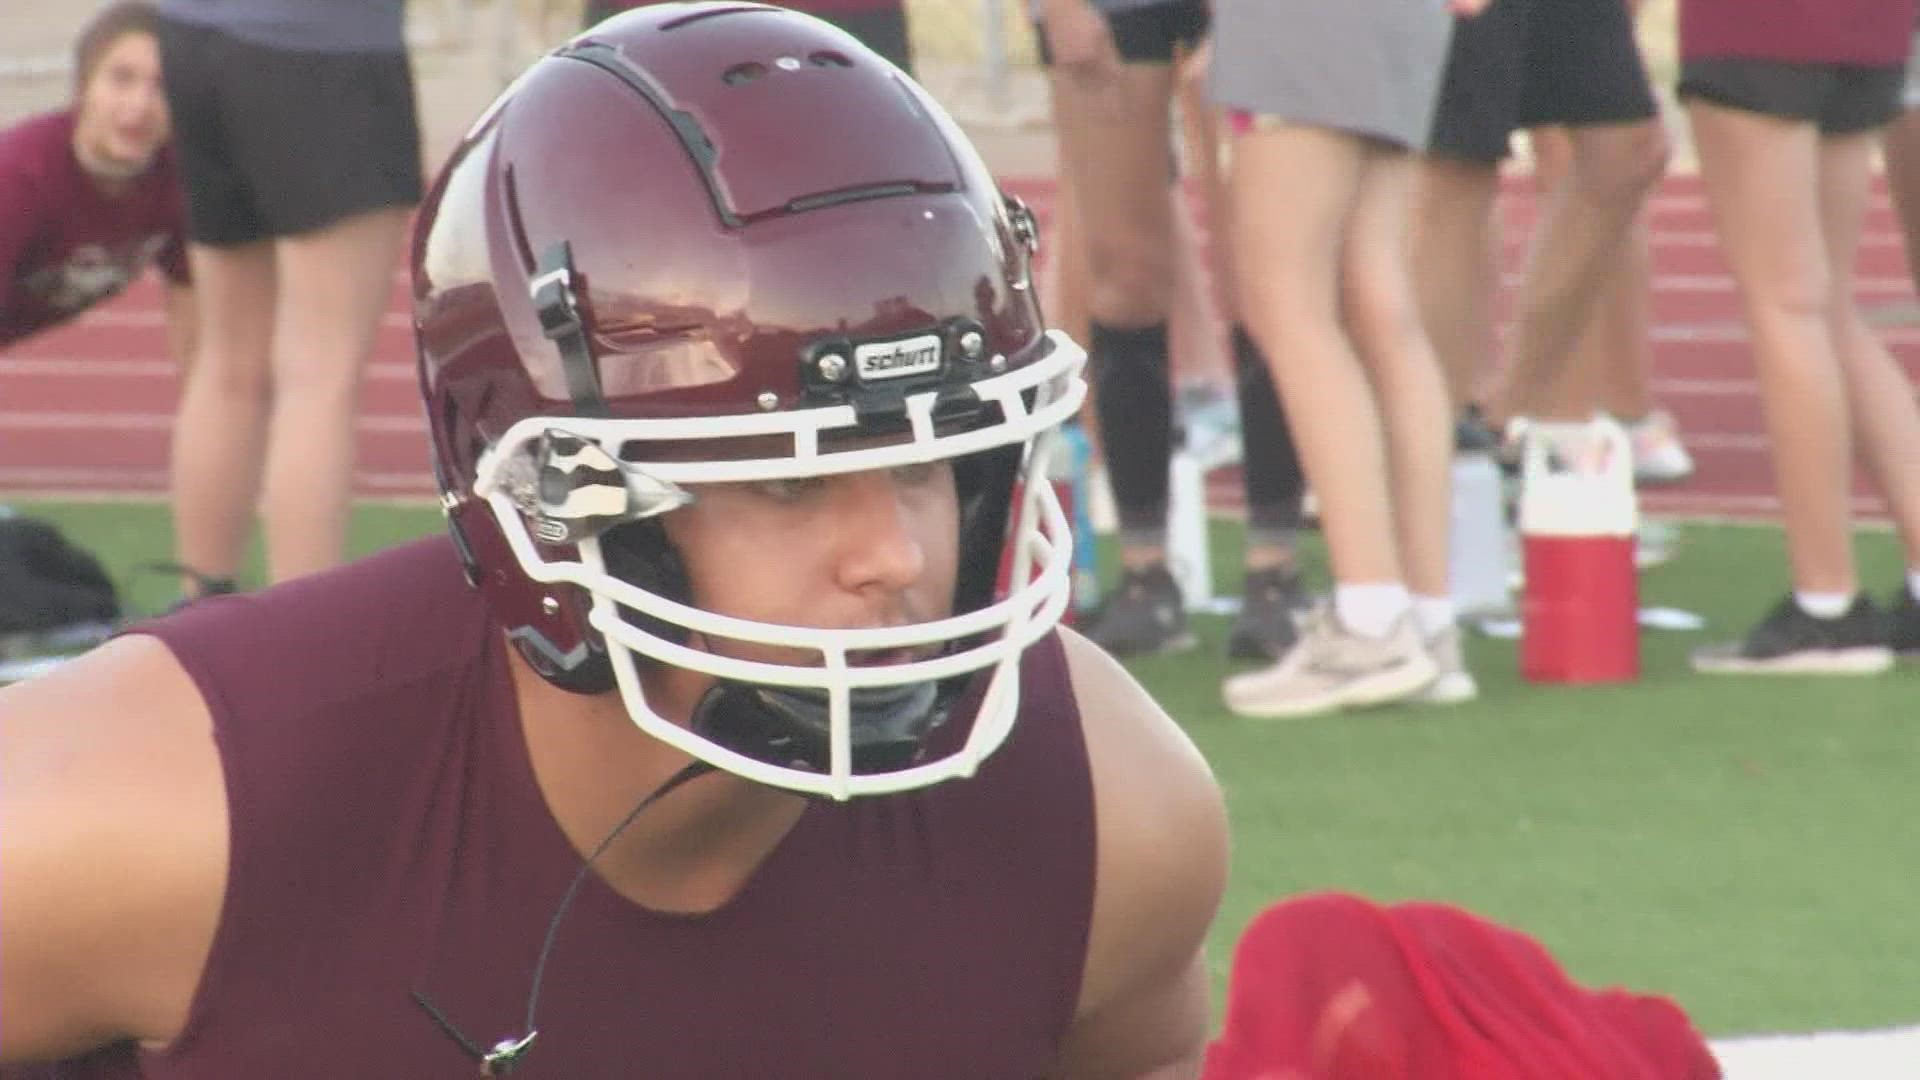 The Trojans only lose 11 seniors from 2021 and expect that experience, and a focus on themselves, to help them in the loaded District 11-3A Div. I.